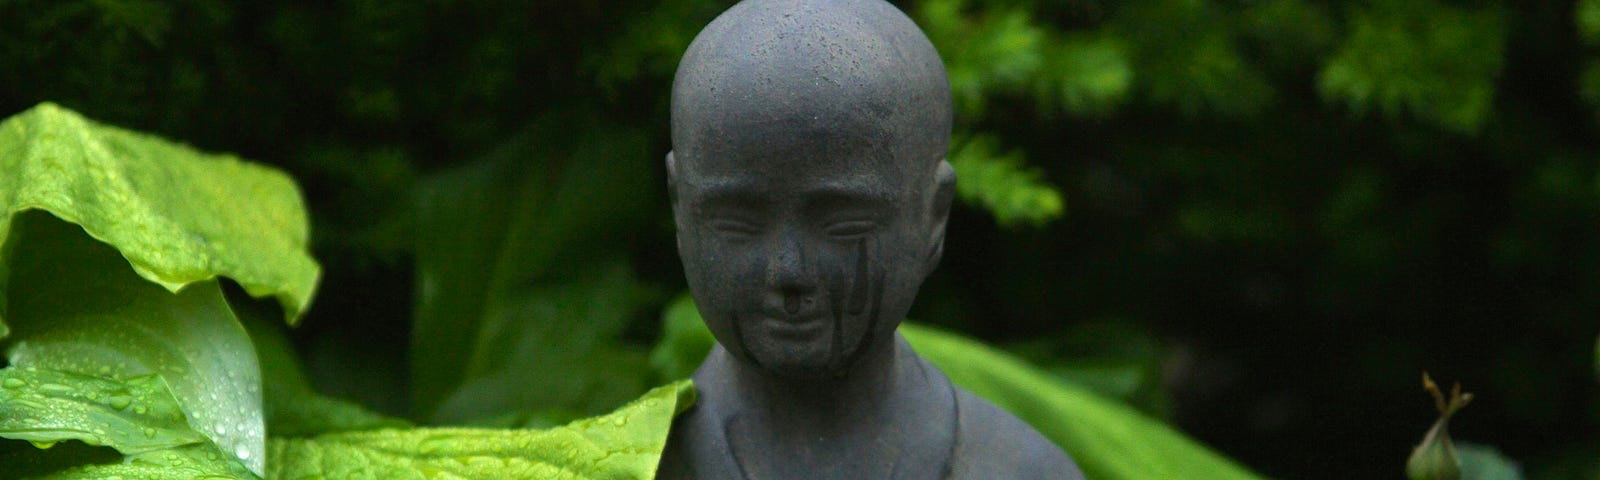 A monk statue sitting among green leaves.